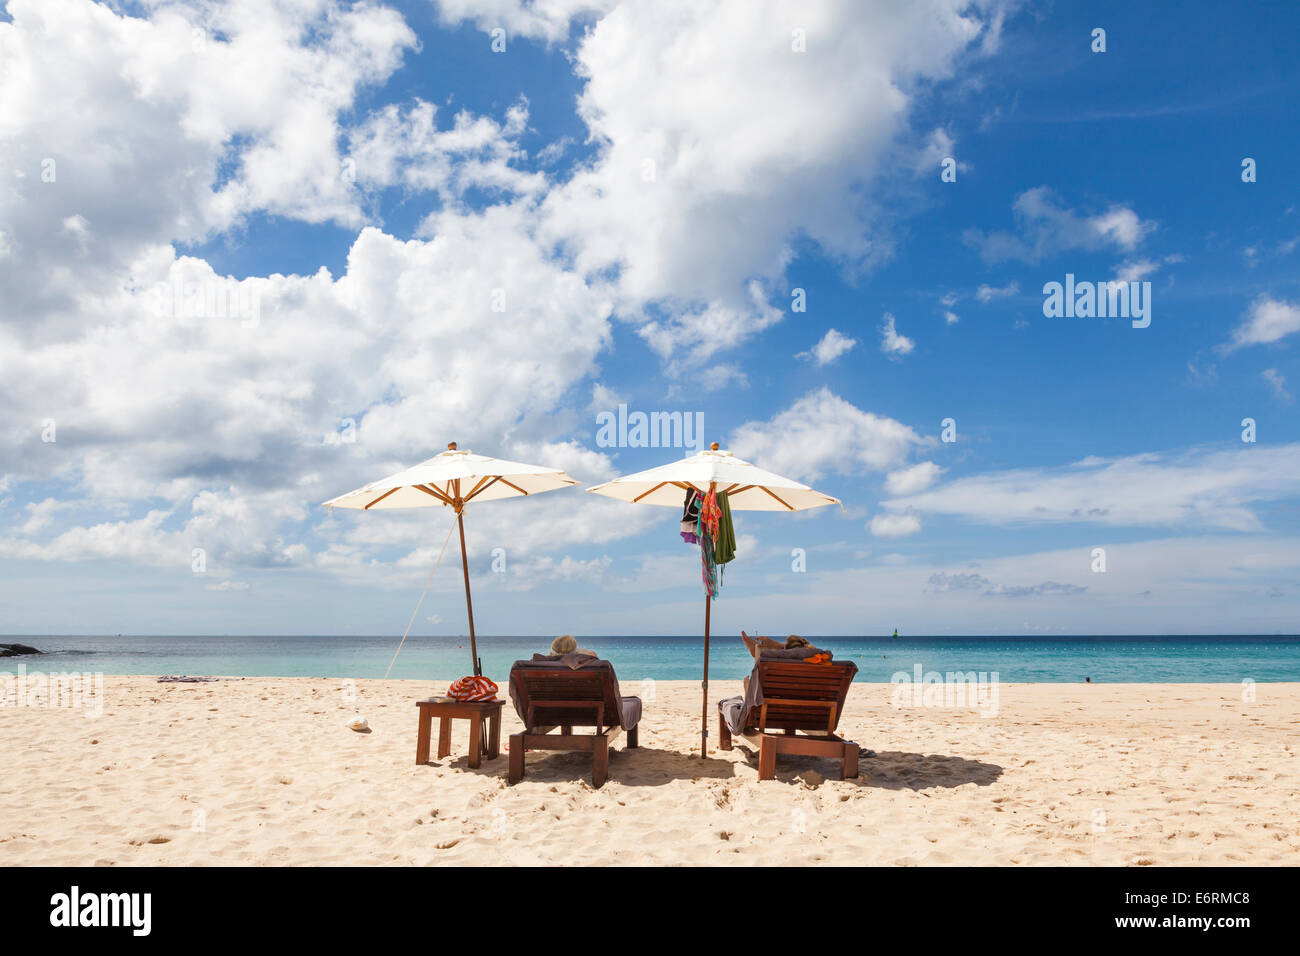 Sunloungers and two sun parasols on the sandy beach at Pansea Beach, Phuket, Thailand with blue sky and white fluffy clouds Stock Photo